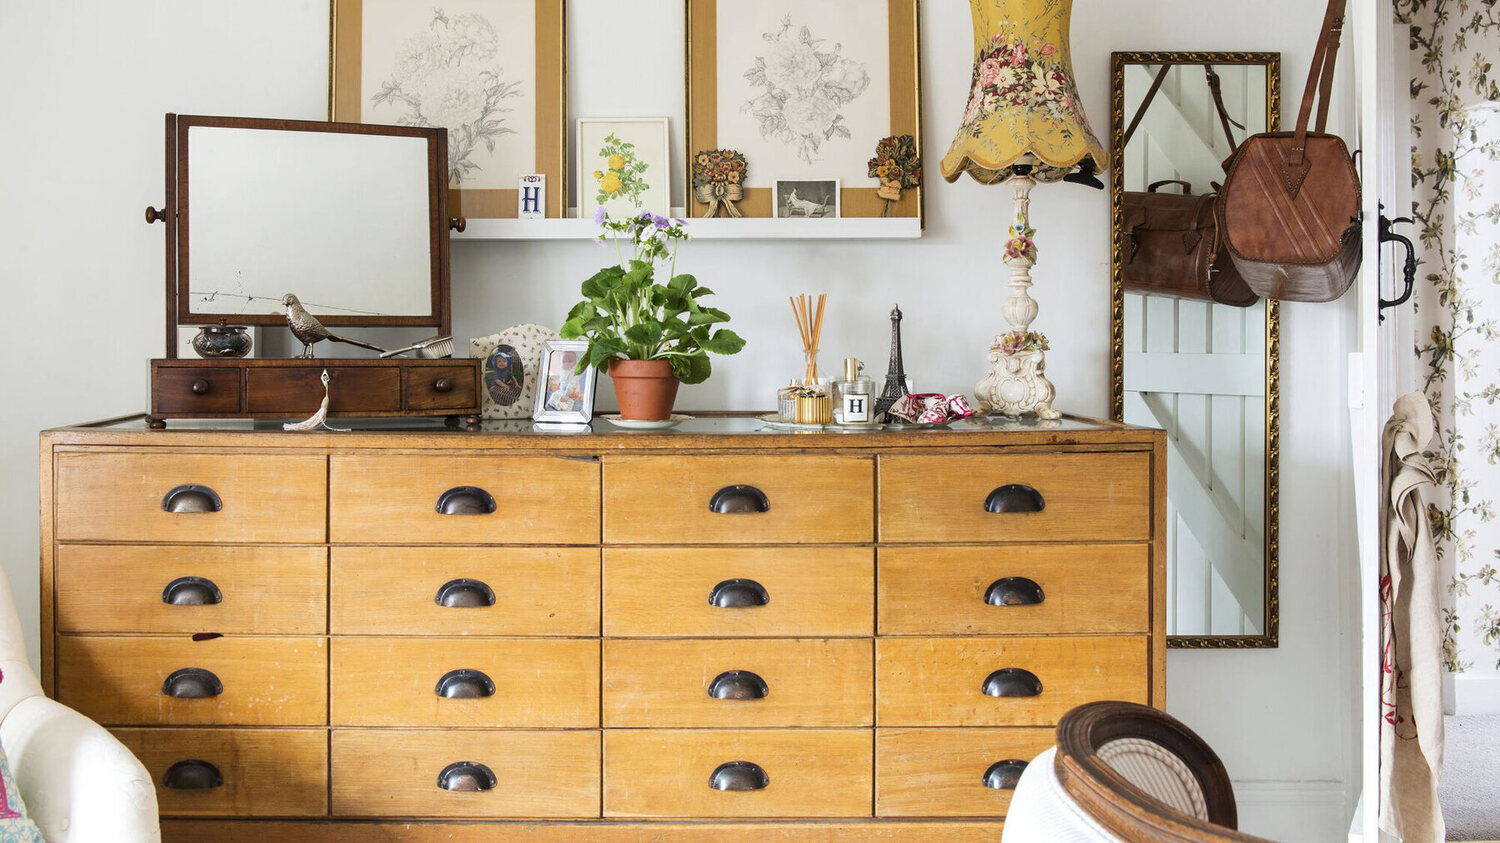 Outdated Storage Trends: 5 Overdone Looks Designers Hate